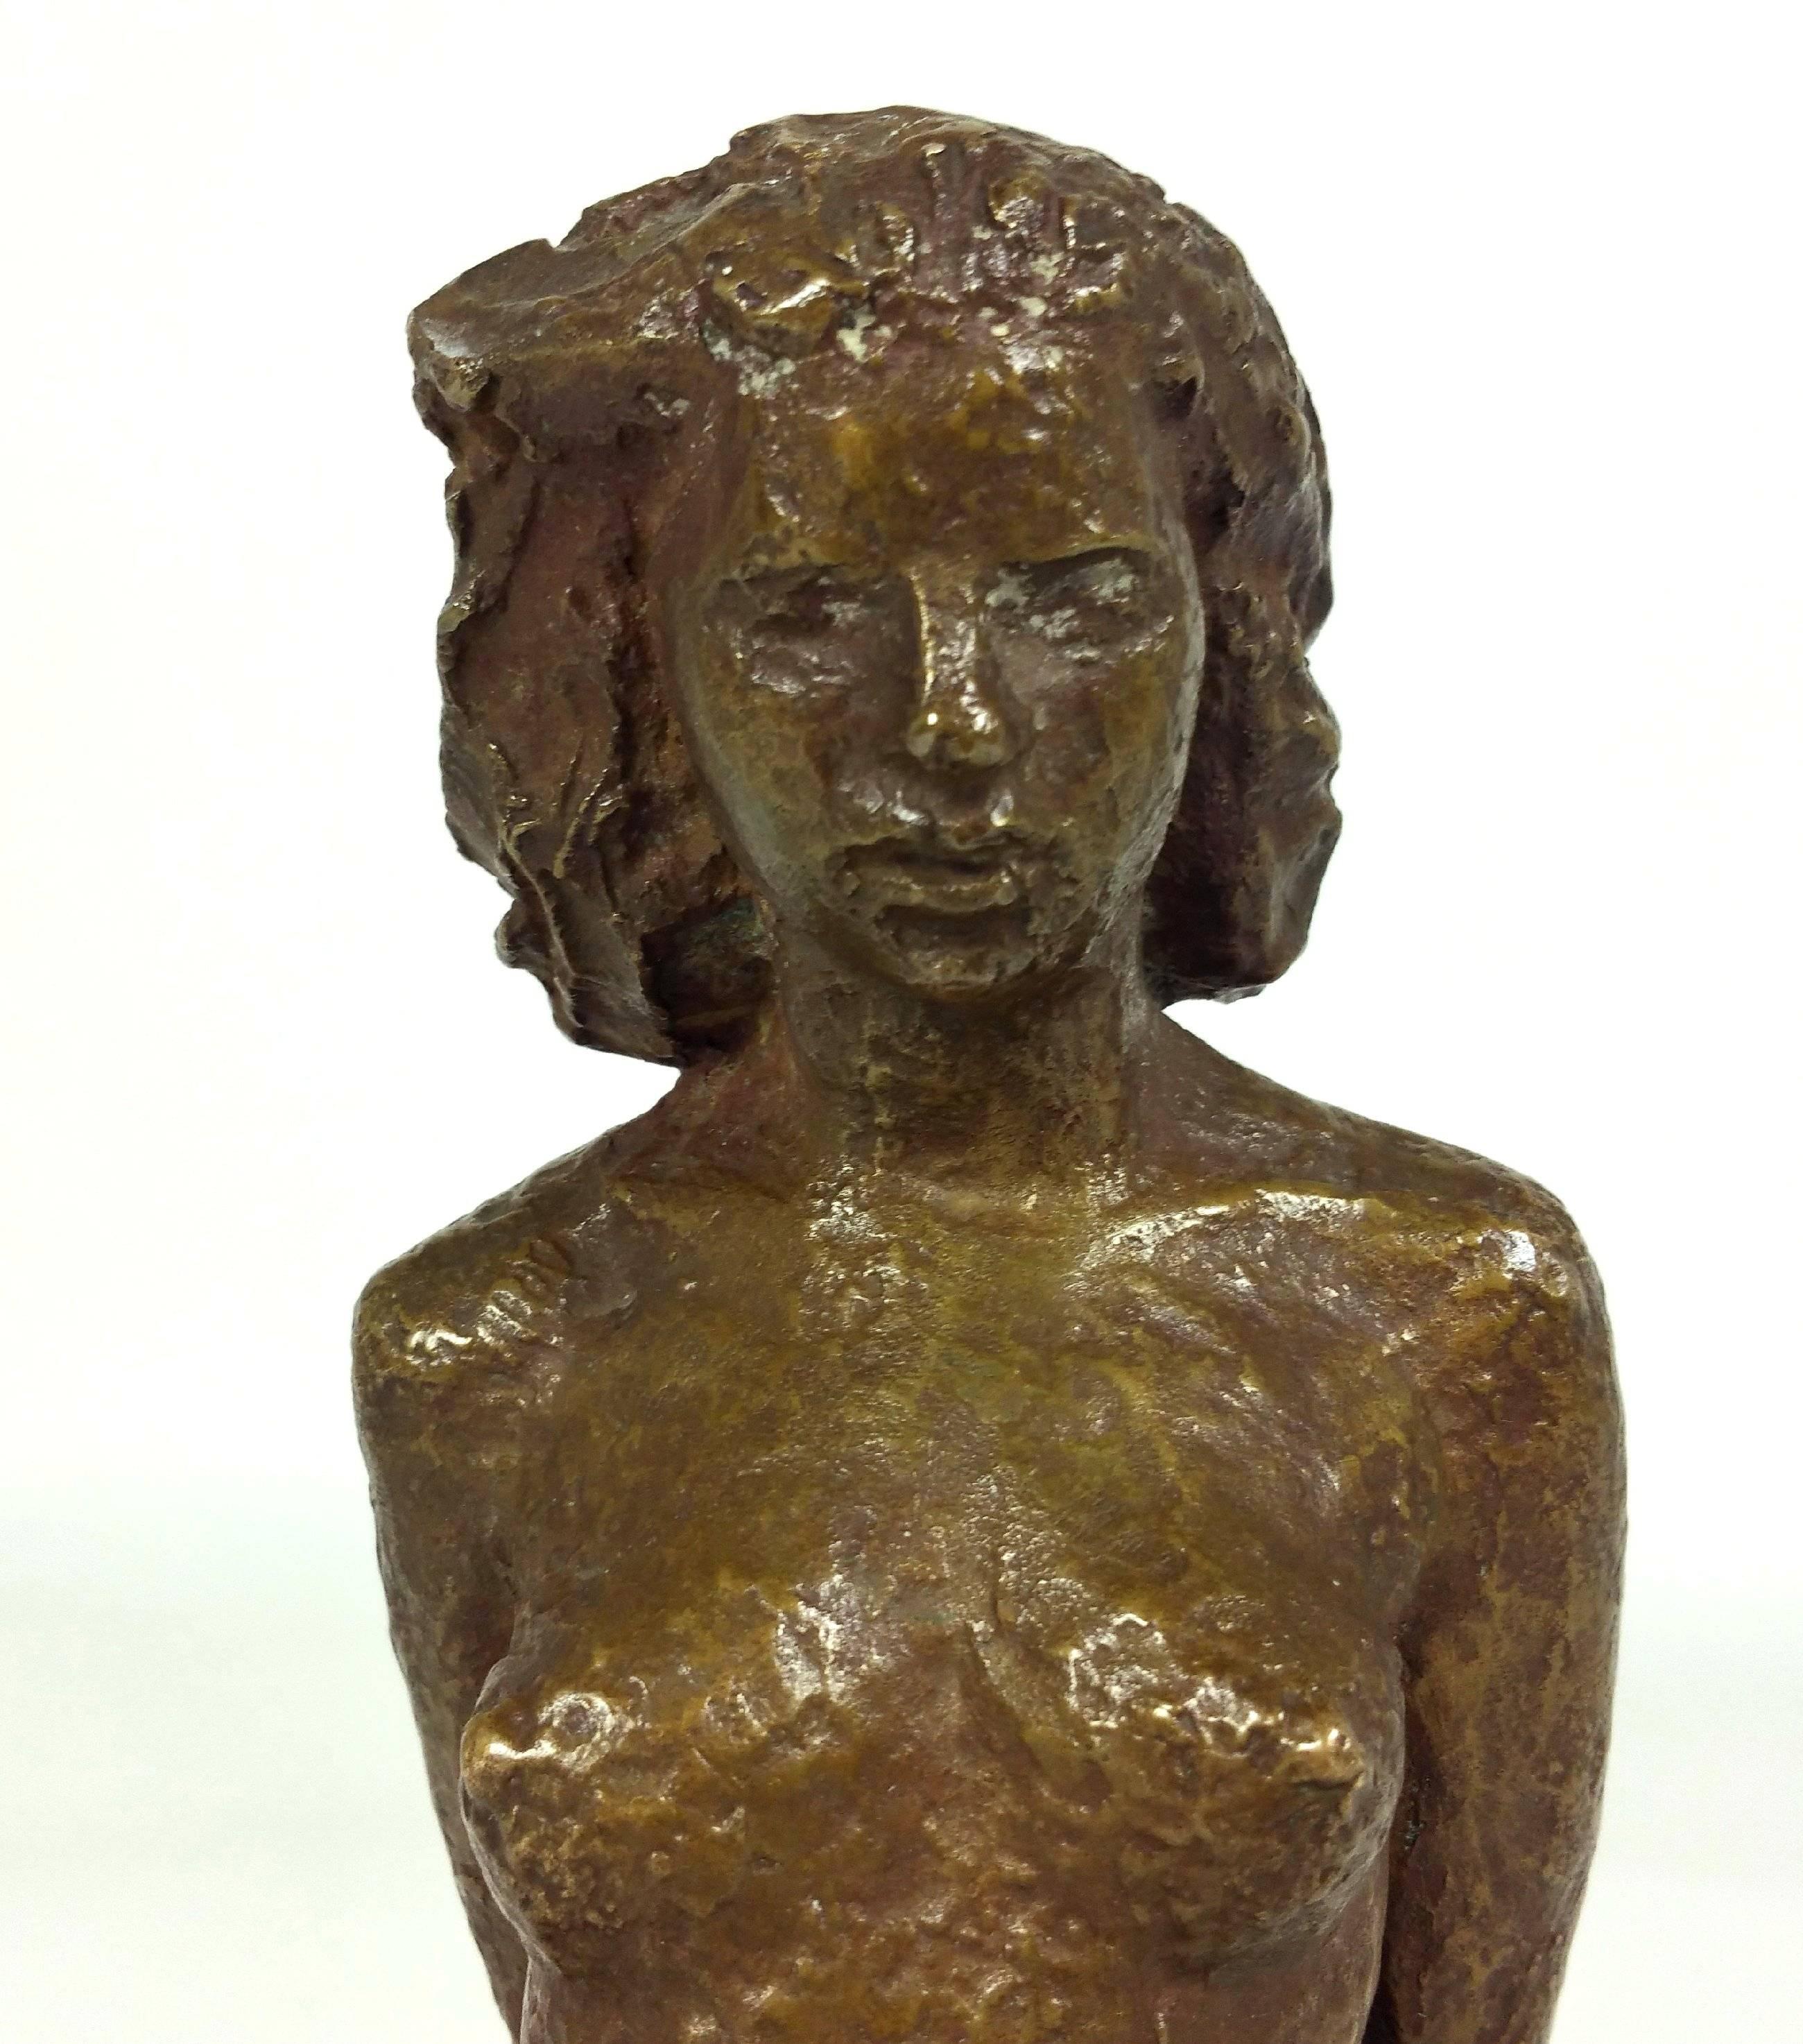 This beautiful bronze sculpture of a standing female nude figure was made by Einar Luterkort, a well-known and prominent Swedish sculptor of the early to mid-20th century. He was born in Stockholm in 1905 and by the late 1920s was already